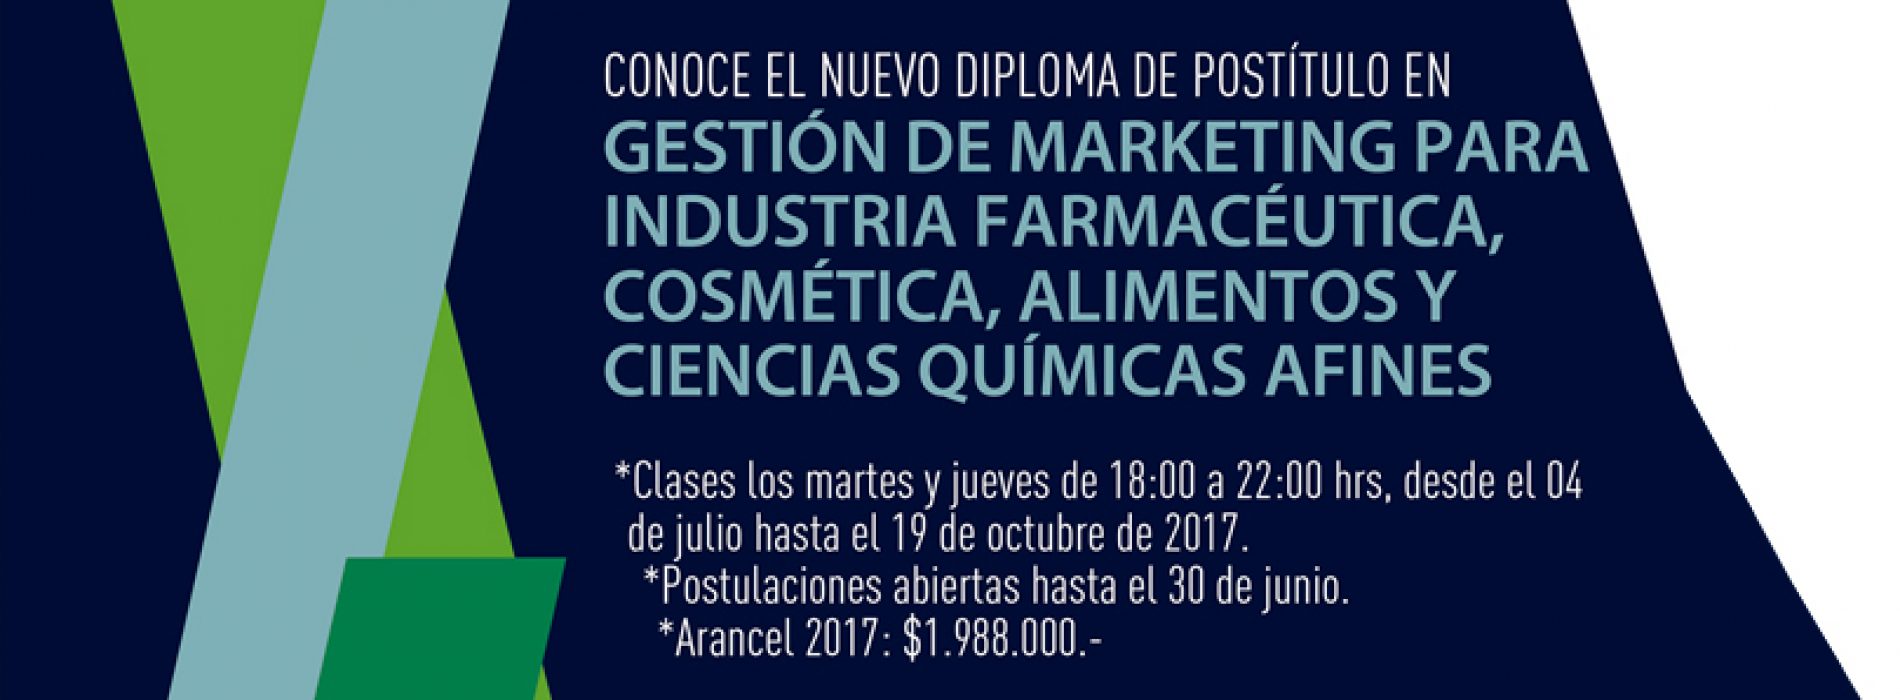 Meet the Diploma in Marketing Management for the Faculty Cs chemical industries and pharmaceutical UChile